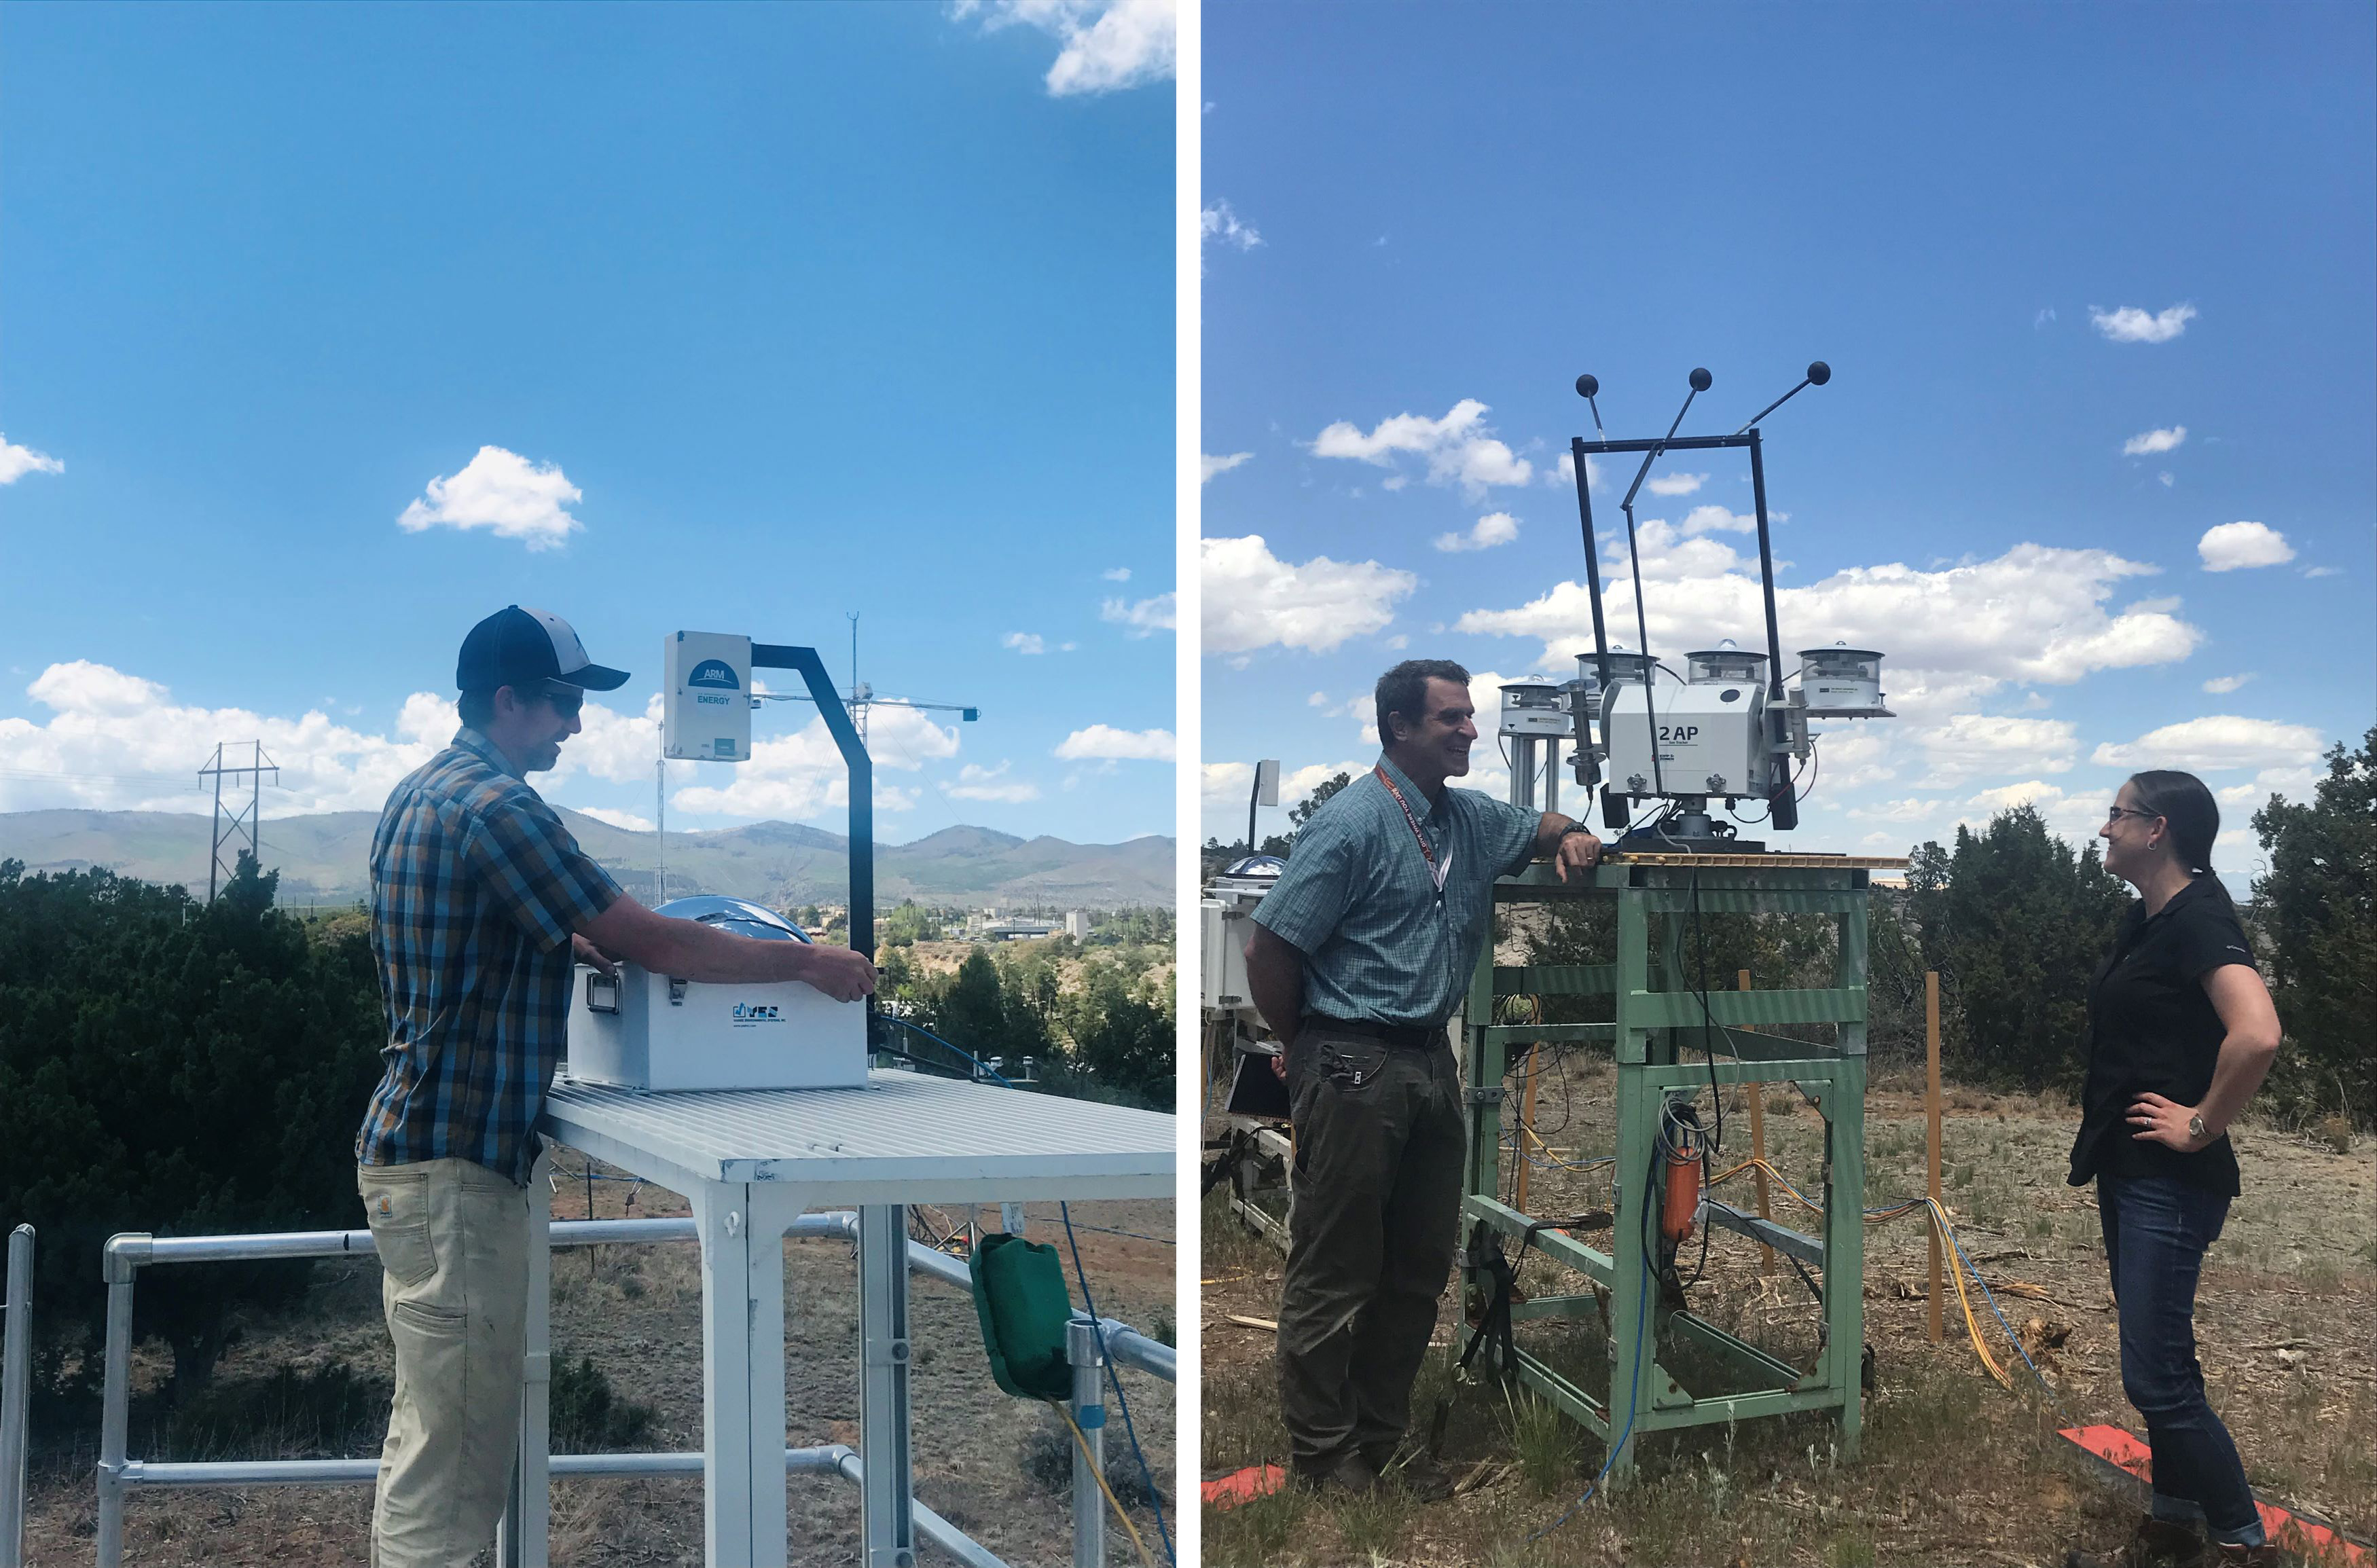 Left photo: John Bilberry adjusts the total sky imager during beta testing. Right photo: Allison Aiken talks with Andrew Wolfsberg, who leads Los Alamos National Laboratory's Earth and Environmental Sciences Division.